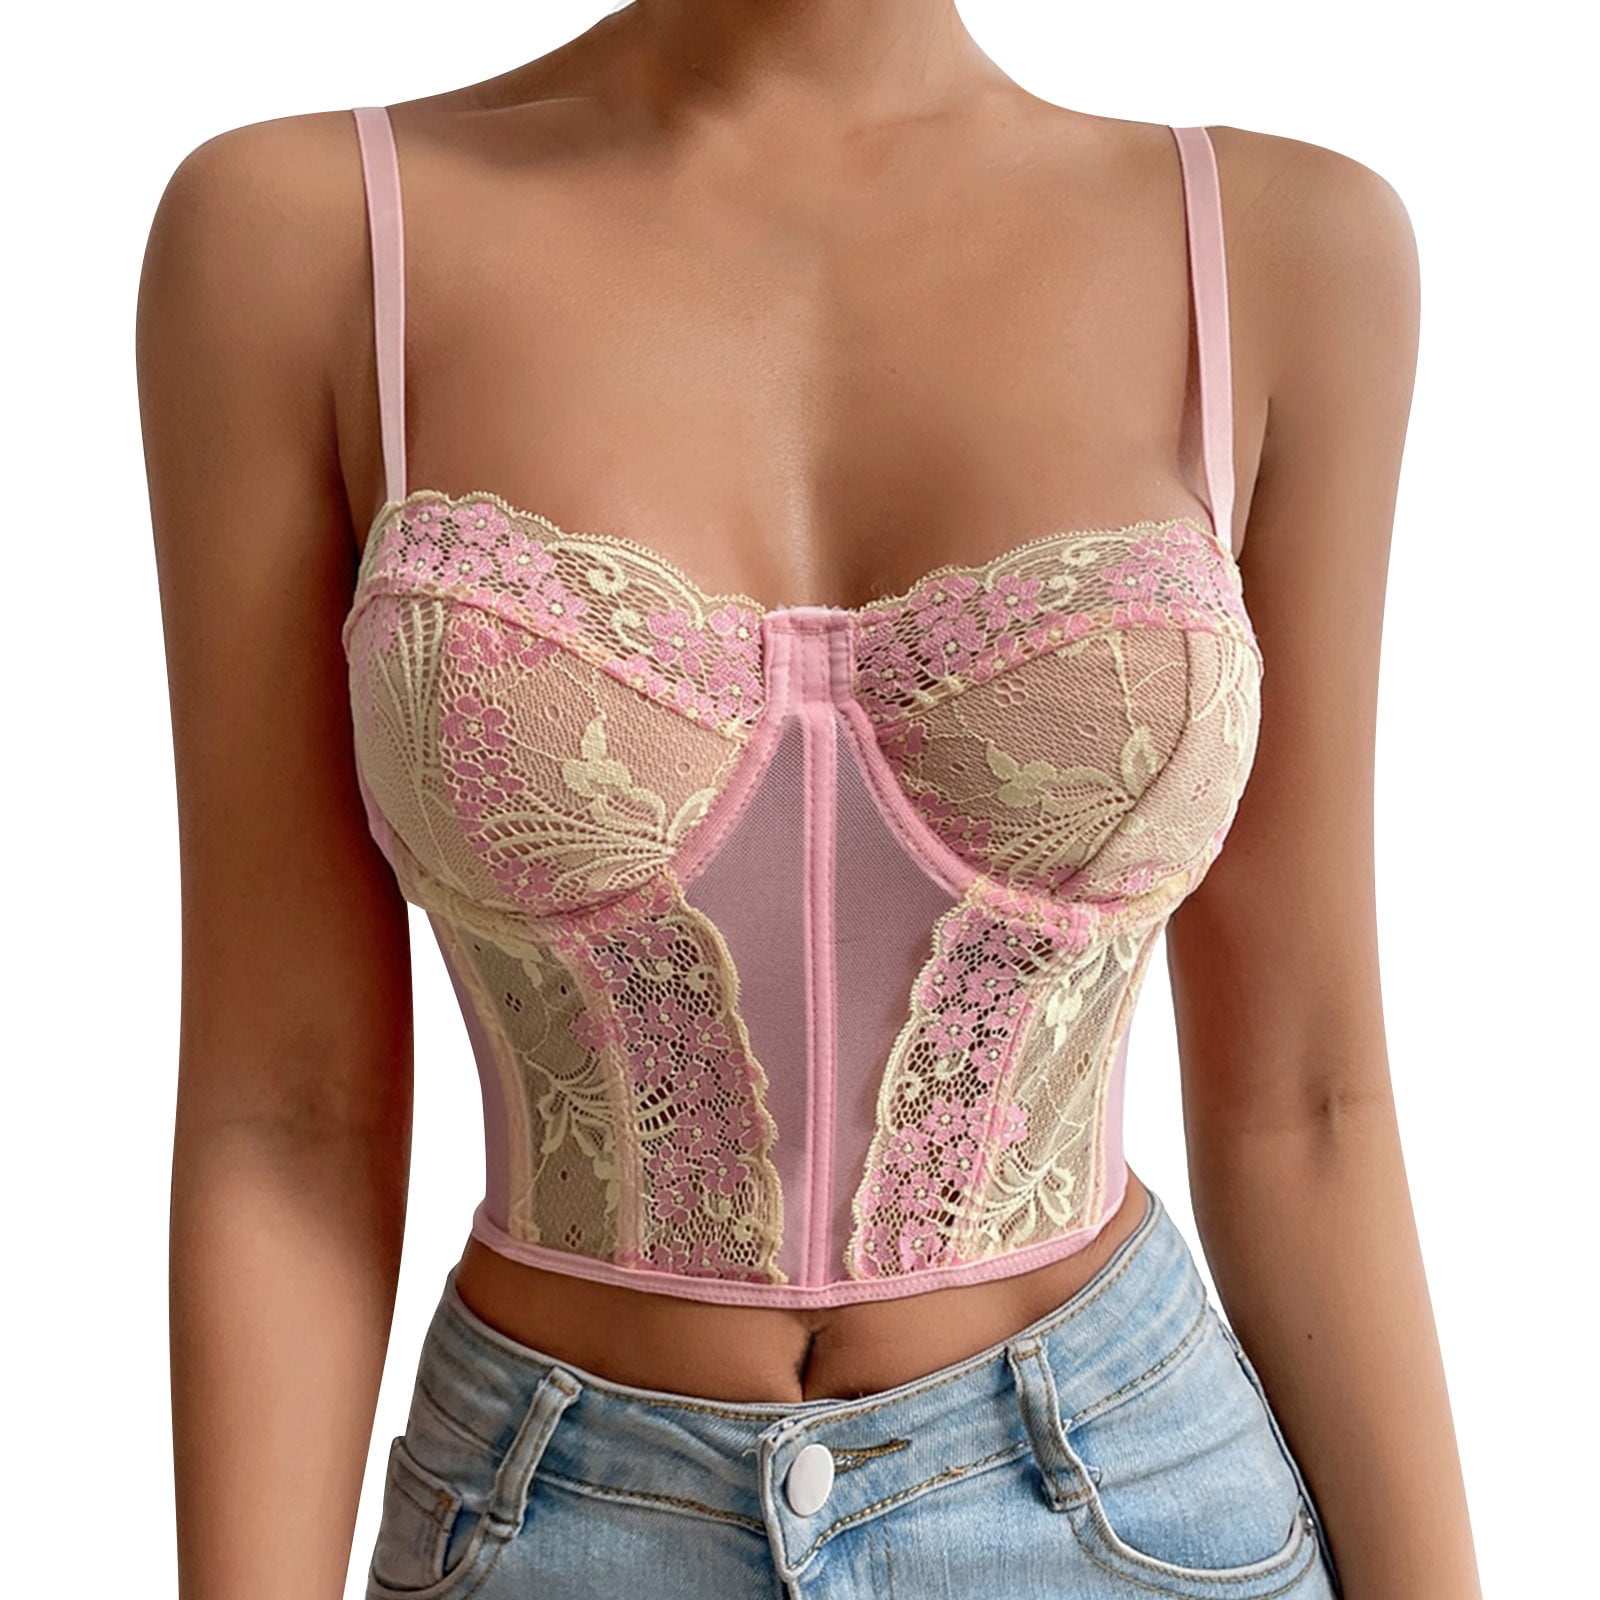 LBECLEY Body Com Dresses Women Women Lace Bra Strapless Satin Tube Top Crop  Bustier Top Sheer Casual Blouse Tops Mini Bustier Double Compression